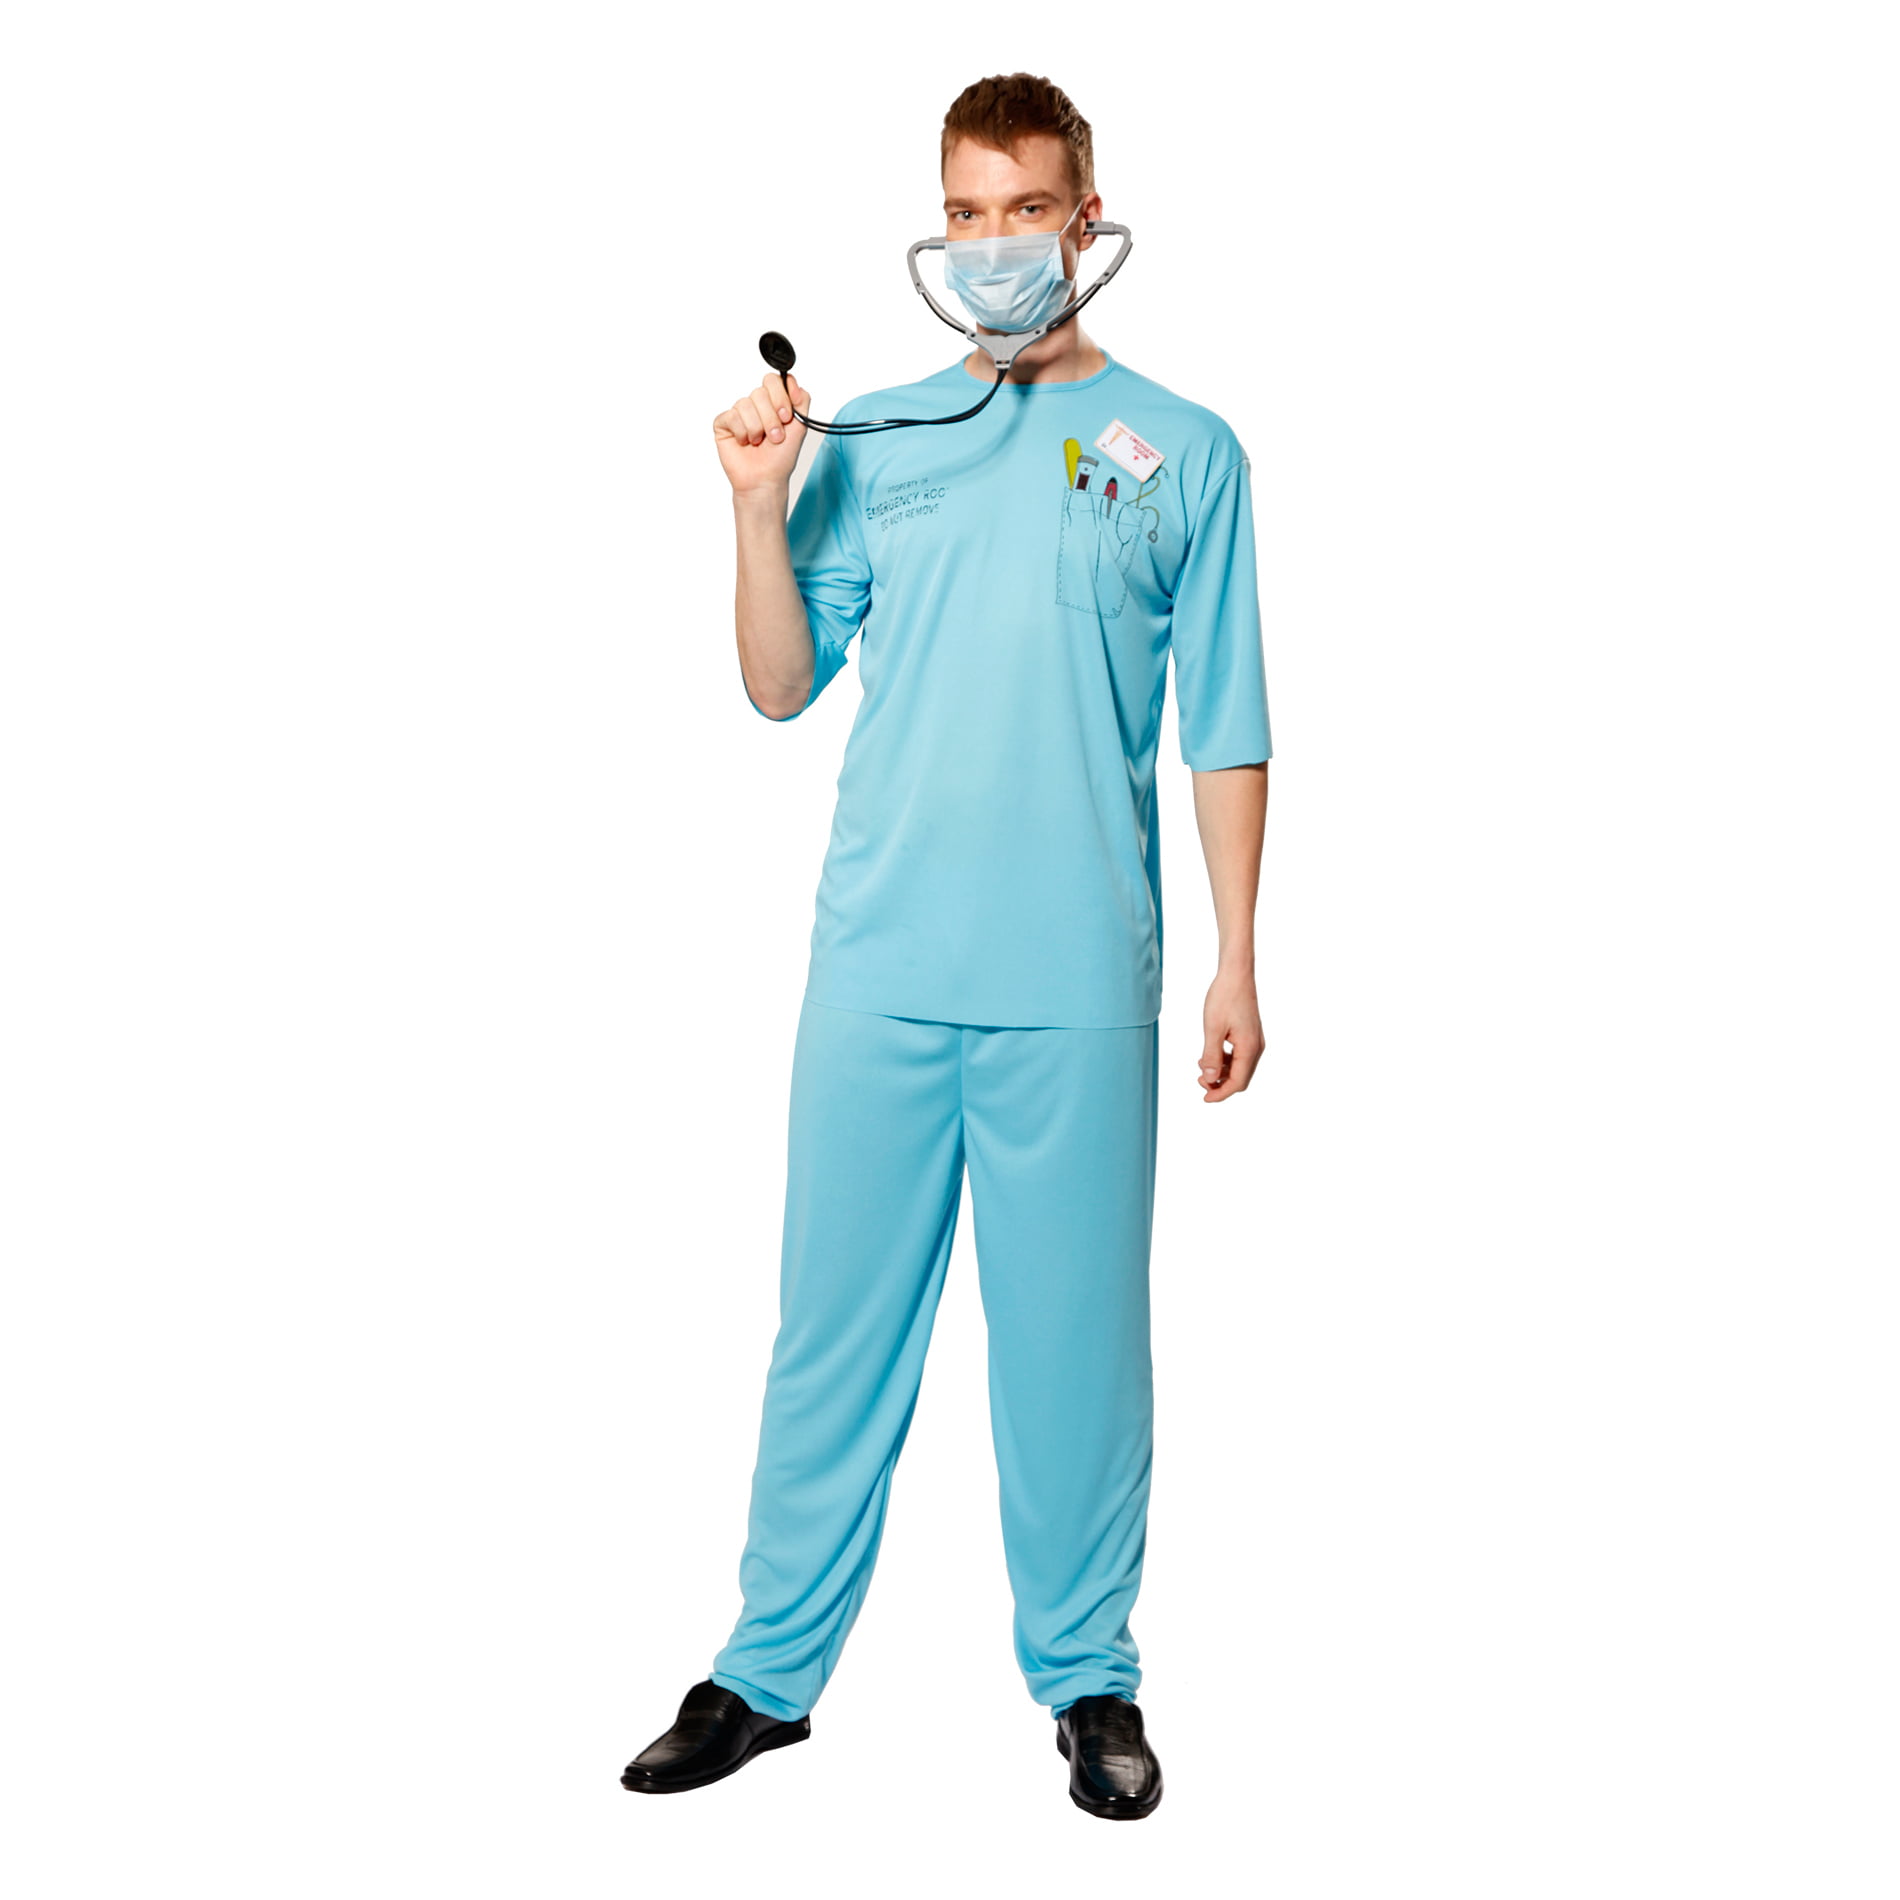 5 Piece Mens Doctor Emergency Services Doctors Scrubs Fancy Dress Costume Outfit